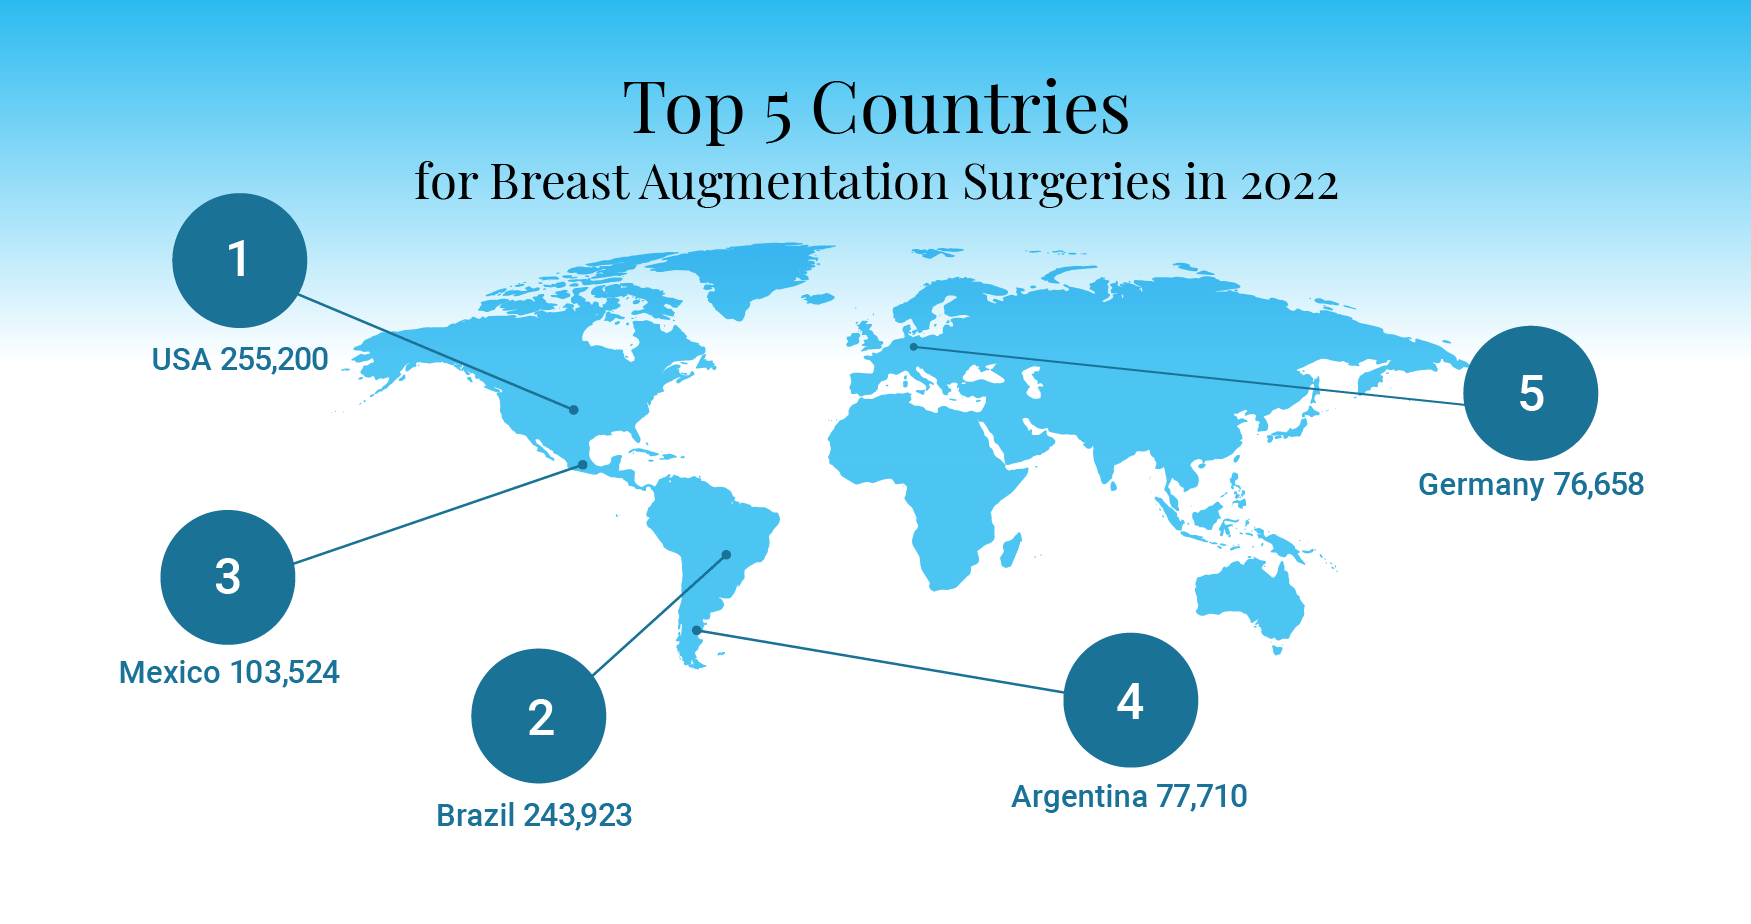 Top 5 Countries for Breast Augmentation Surgeries in 2022